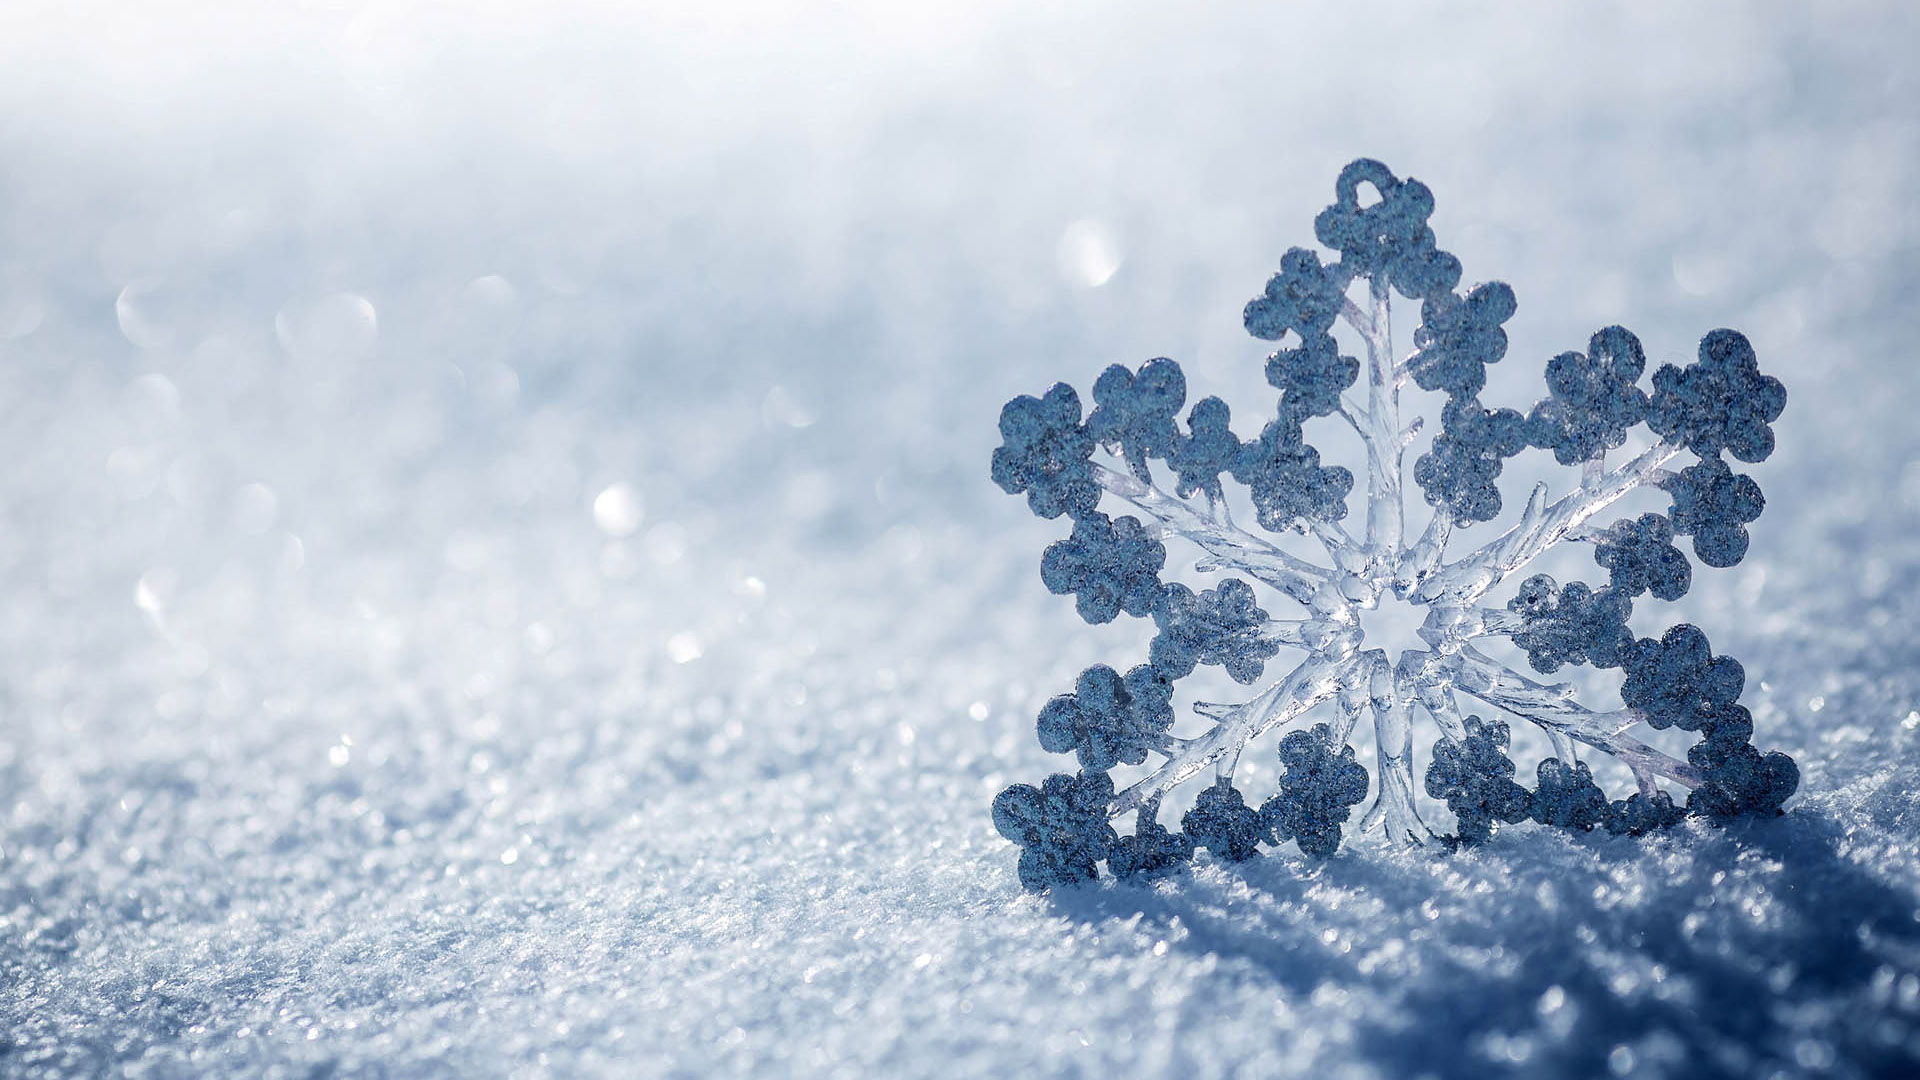 Snowflake Background Wallpaper High Definition Quality